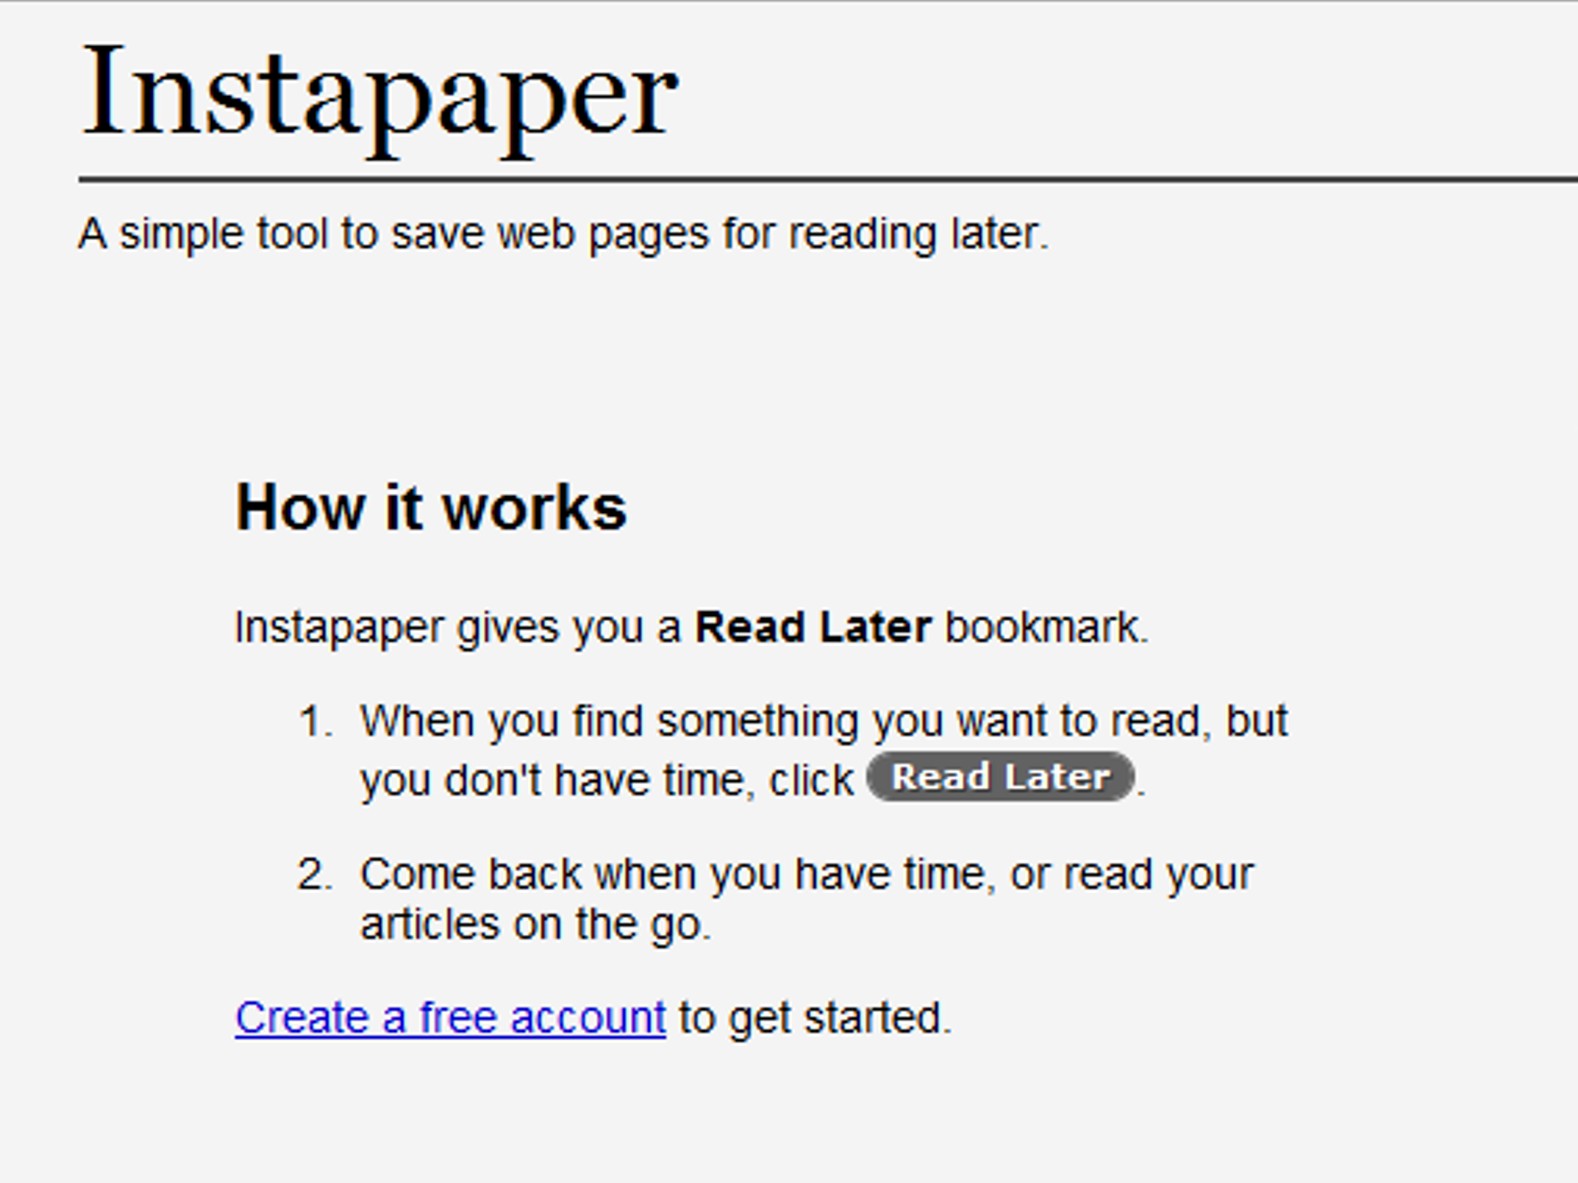 <b>Tips & Tricks: Use Instapaper’s Free Service To Send Web Articles To Your Fire!</b>